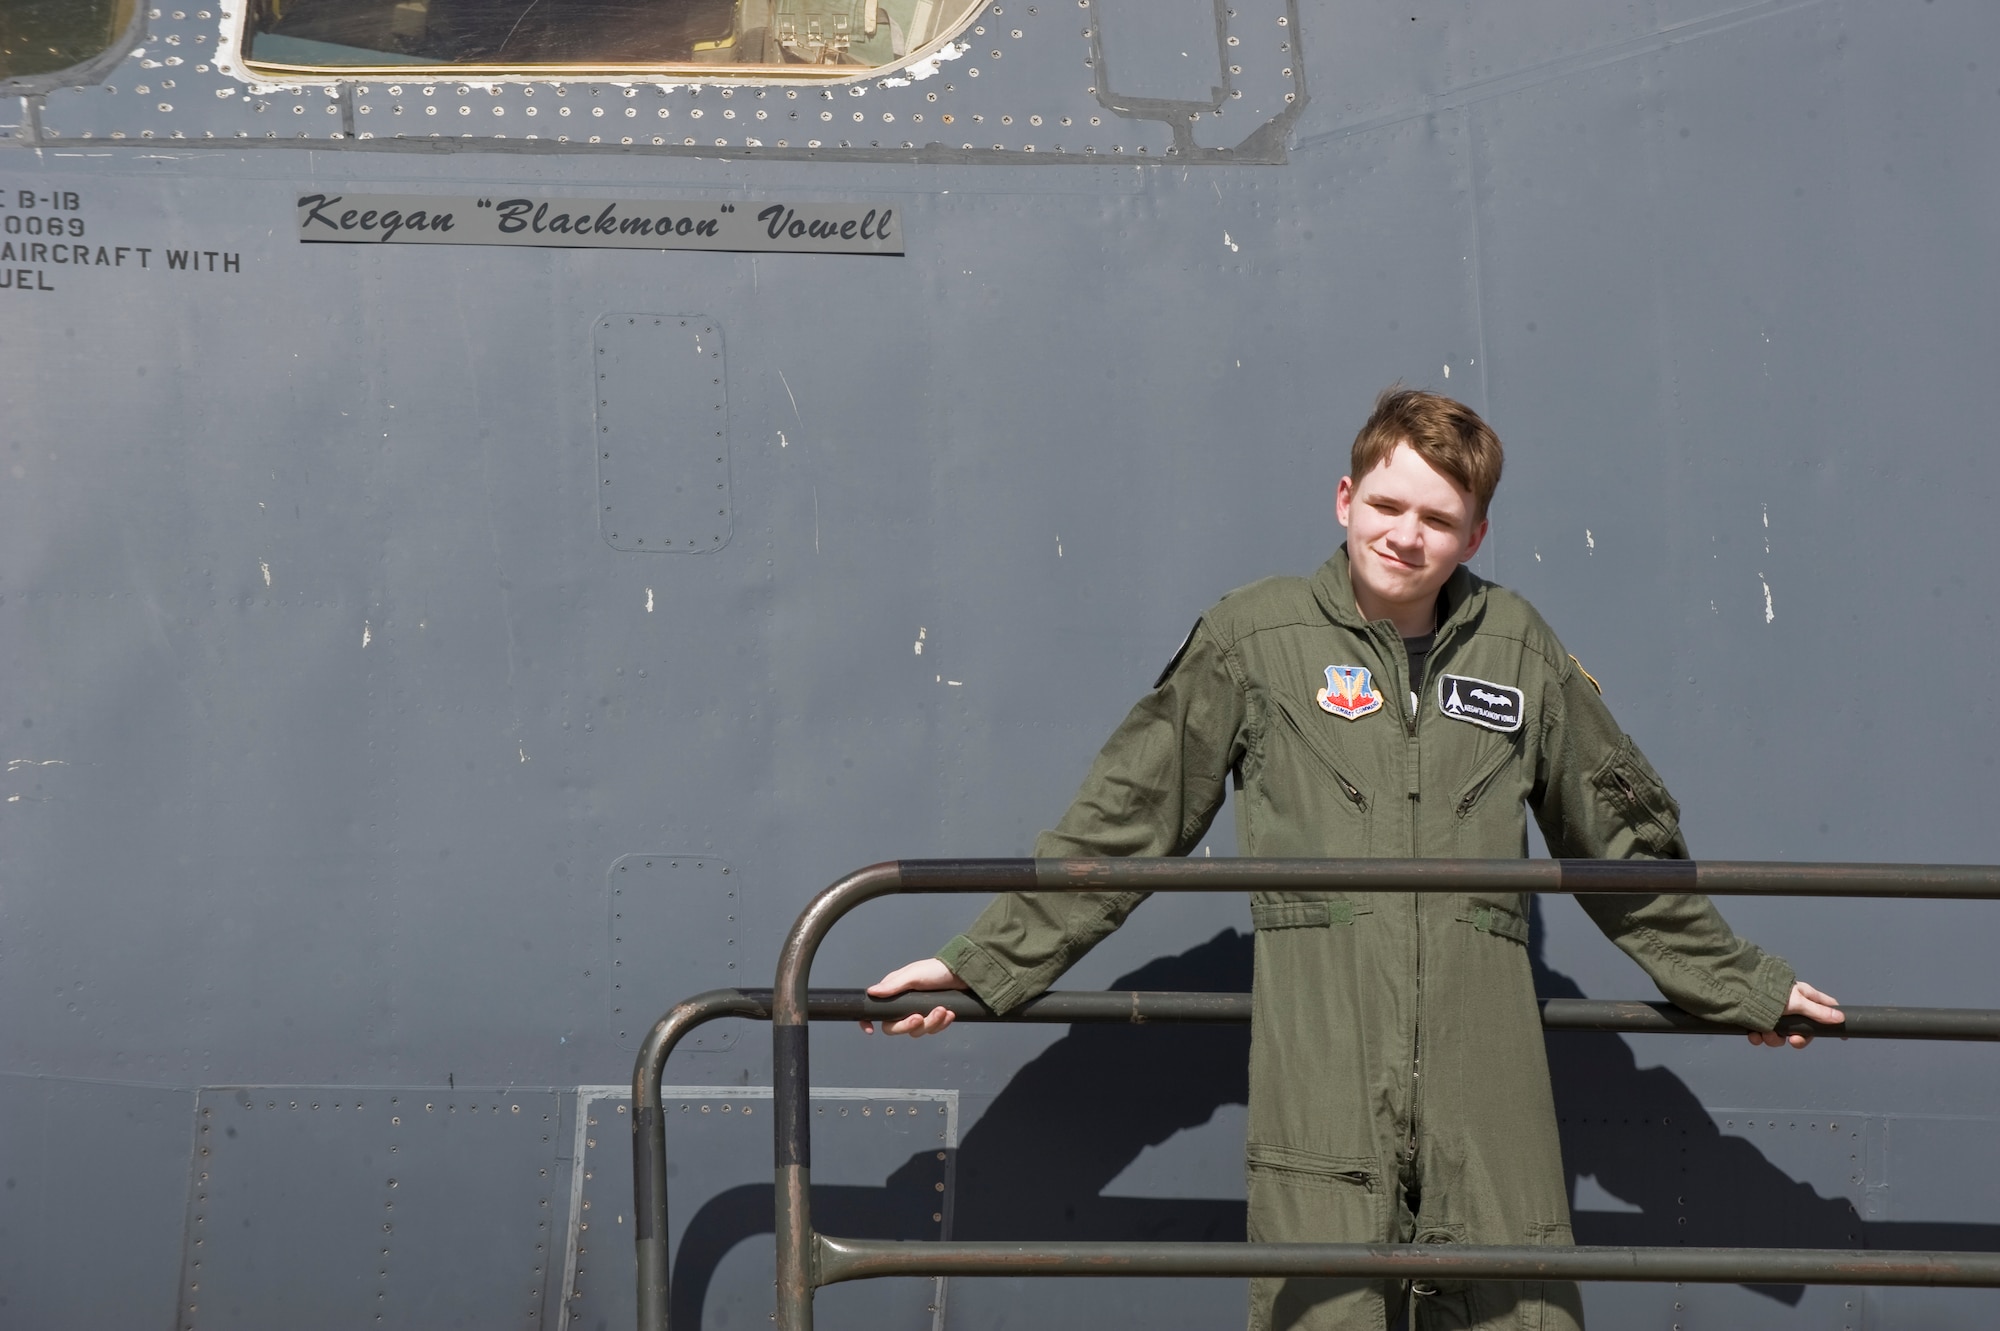 Keegan Vowell, 16-year-old Abilene resident, stands next to a B-1 Bomber with his name on it during a “Pilot for a Day” tour Jan. 14, 2013, at Dyess Air Force Base, Texas. Throughout the event, Keegan received his own flight suit, was demonstrated the capabilities of the 7th Security Forces K-9 Unit, toured the air traffic control tower, taxied a bomber, had his name put onto an aircraft, created his own Hollywood explosion with the 7th Civil Engineer Squadron Explosive Ordinance Disposal Unit and was presented a coin from the base commander. (U.S. Air Force photo by Airman 1st Class Jonathan Stefanko/ Released)